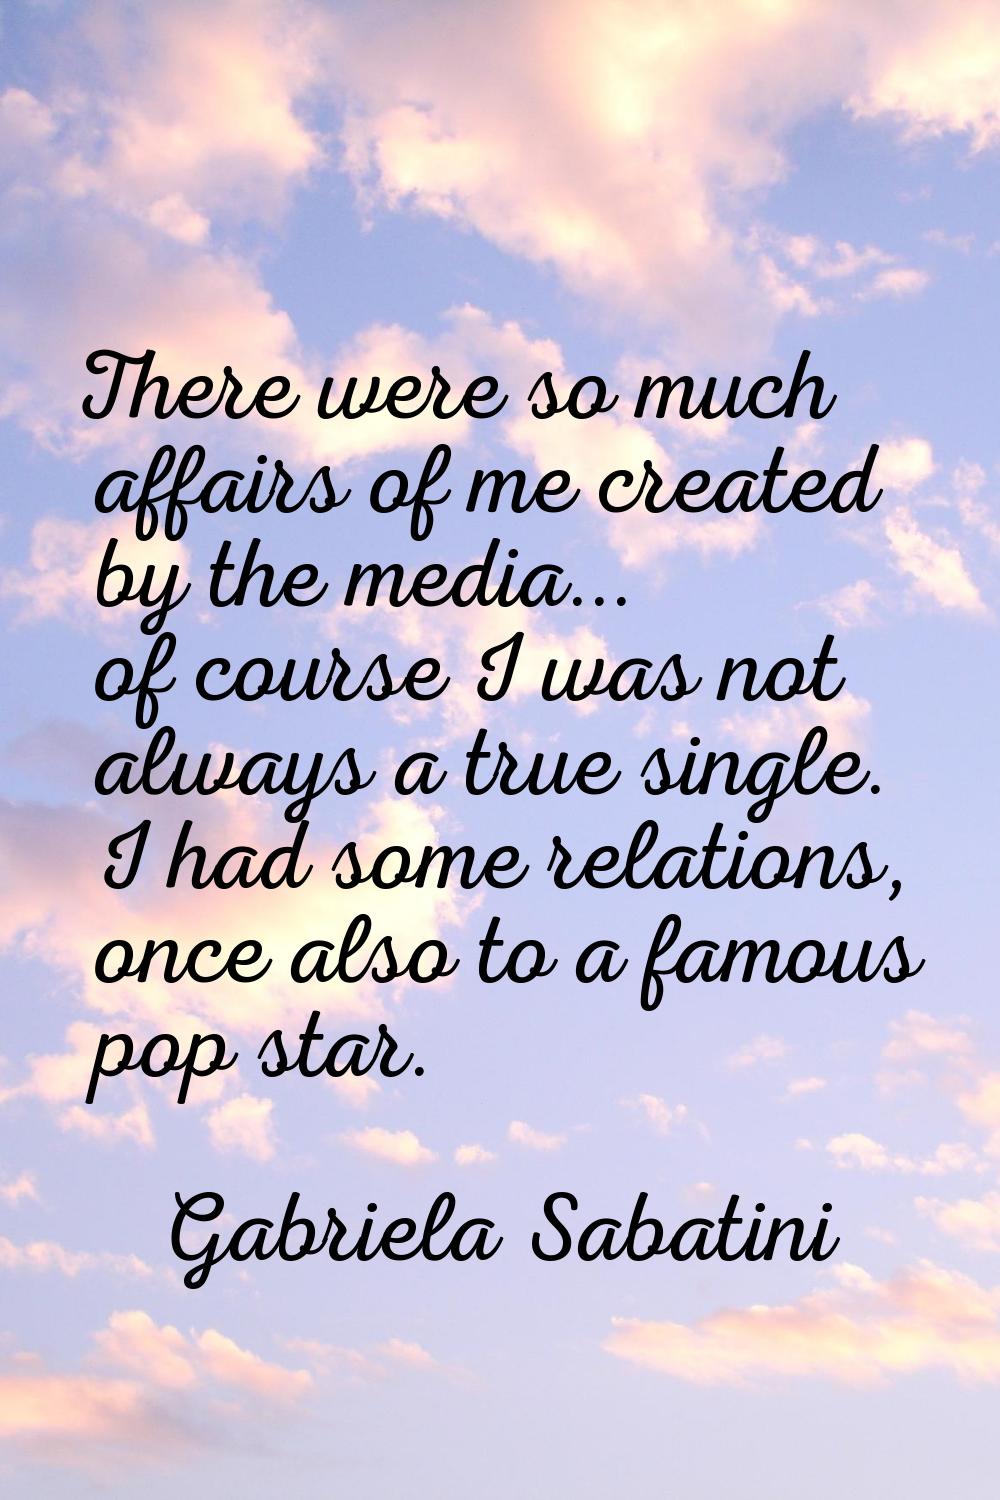 There were so much affairs of me created by the media... of course I was not always a true single. 